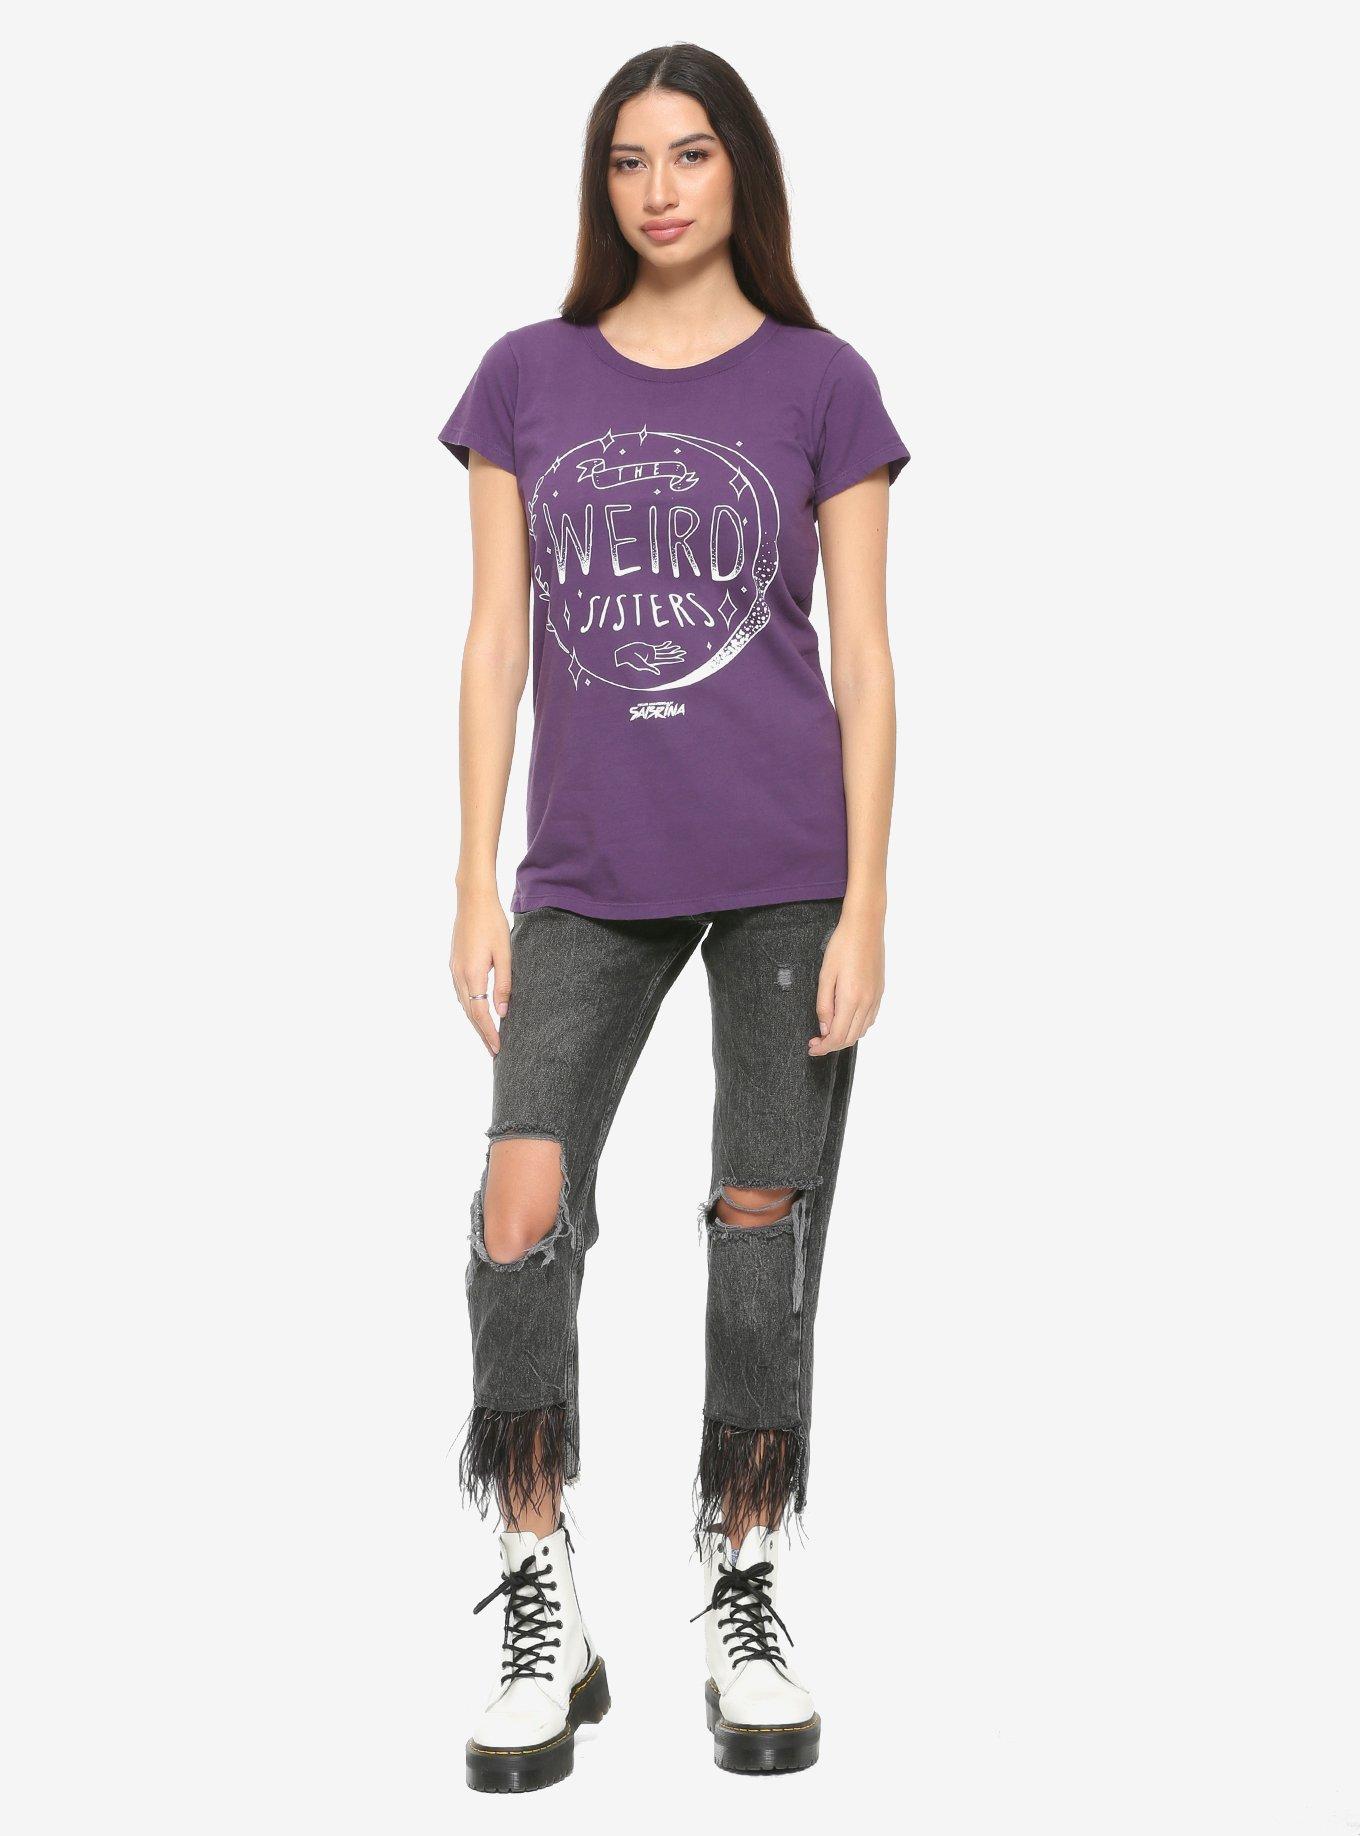 Chilling Adventures Of Sabrina The Weird Sisters Girls T-Shirt, MULTI, alternate